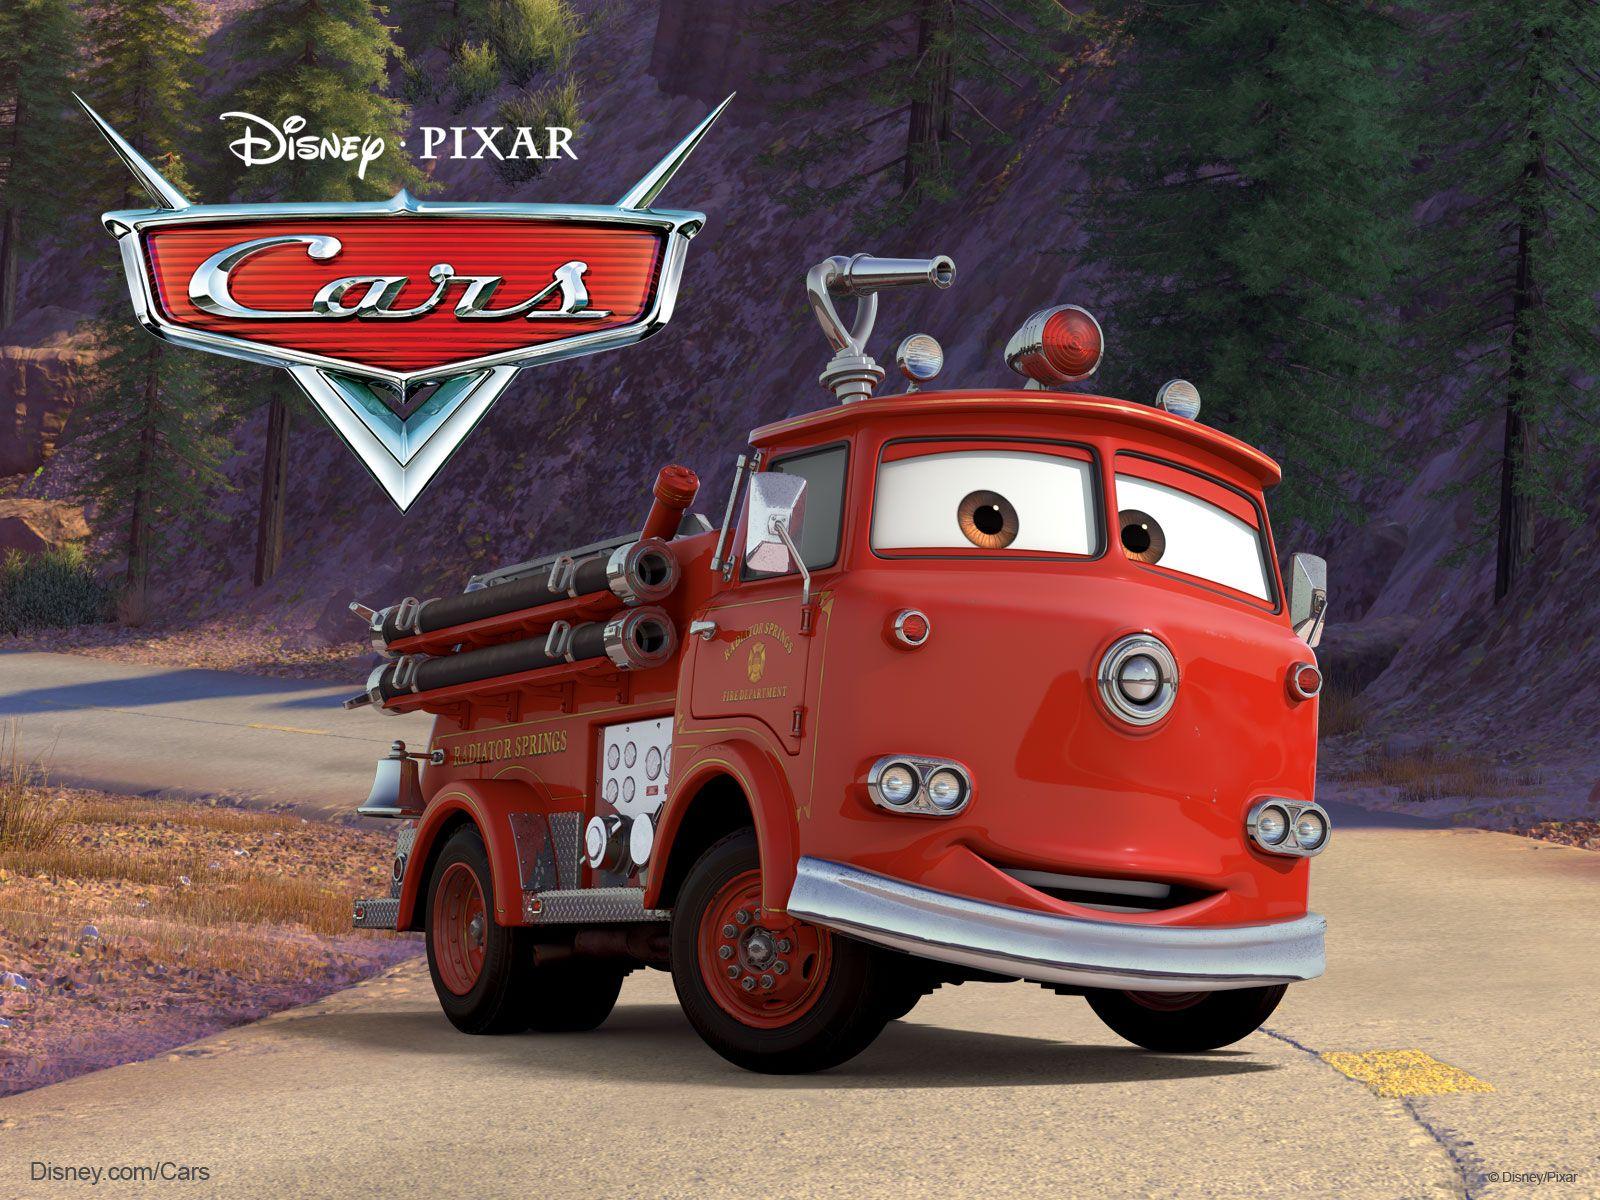 from Carsland. Disney cars characters, Cars characters, Cars movie